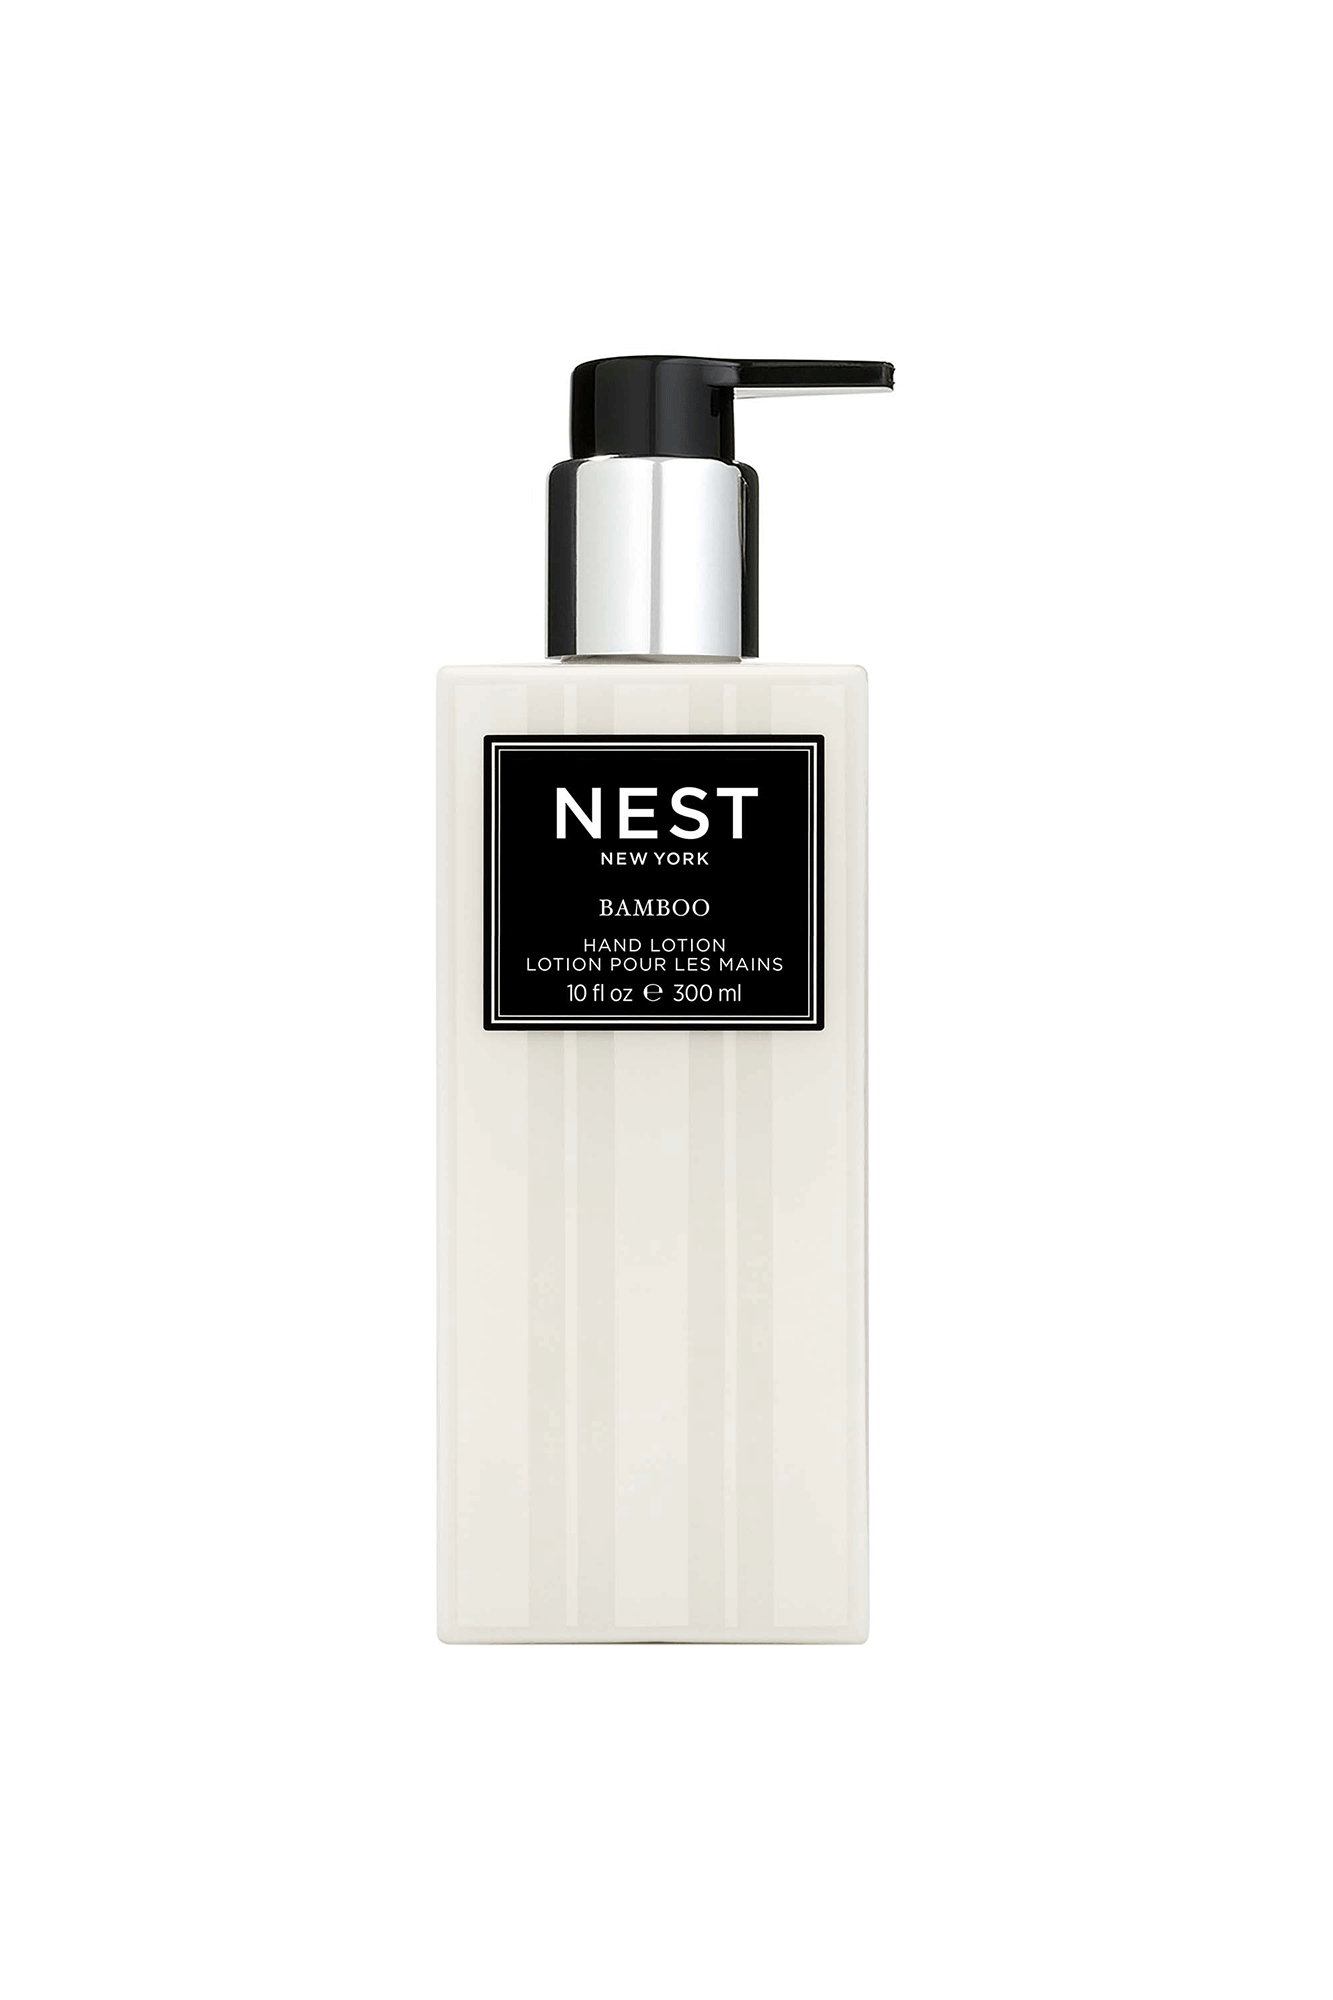 Nurture your skin with Bamboo Hand Lotion from Nest, featuring a blend of white florals, lush green notes and hints of citrus. With up to 600 pumps per bottle, enjoy long-lasting aroma of an inviting garden in every use.